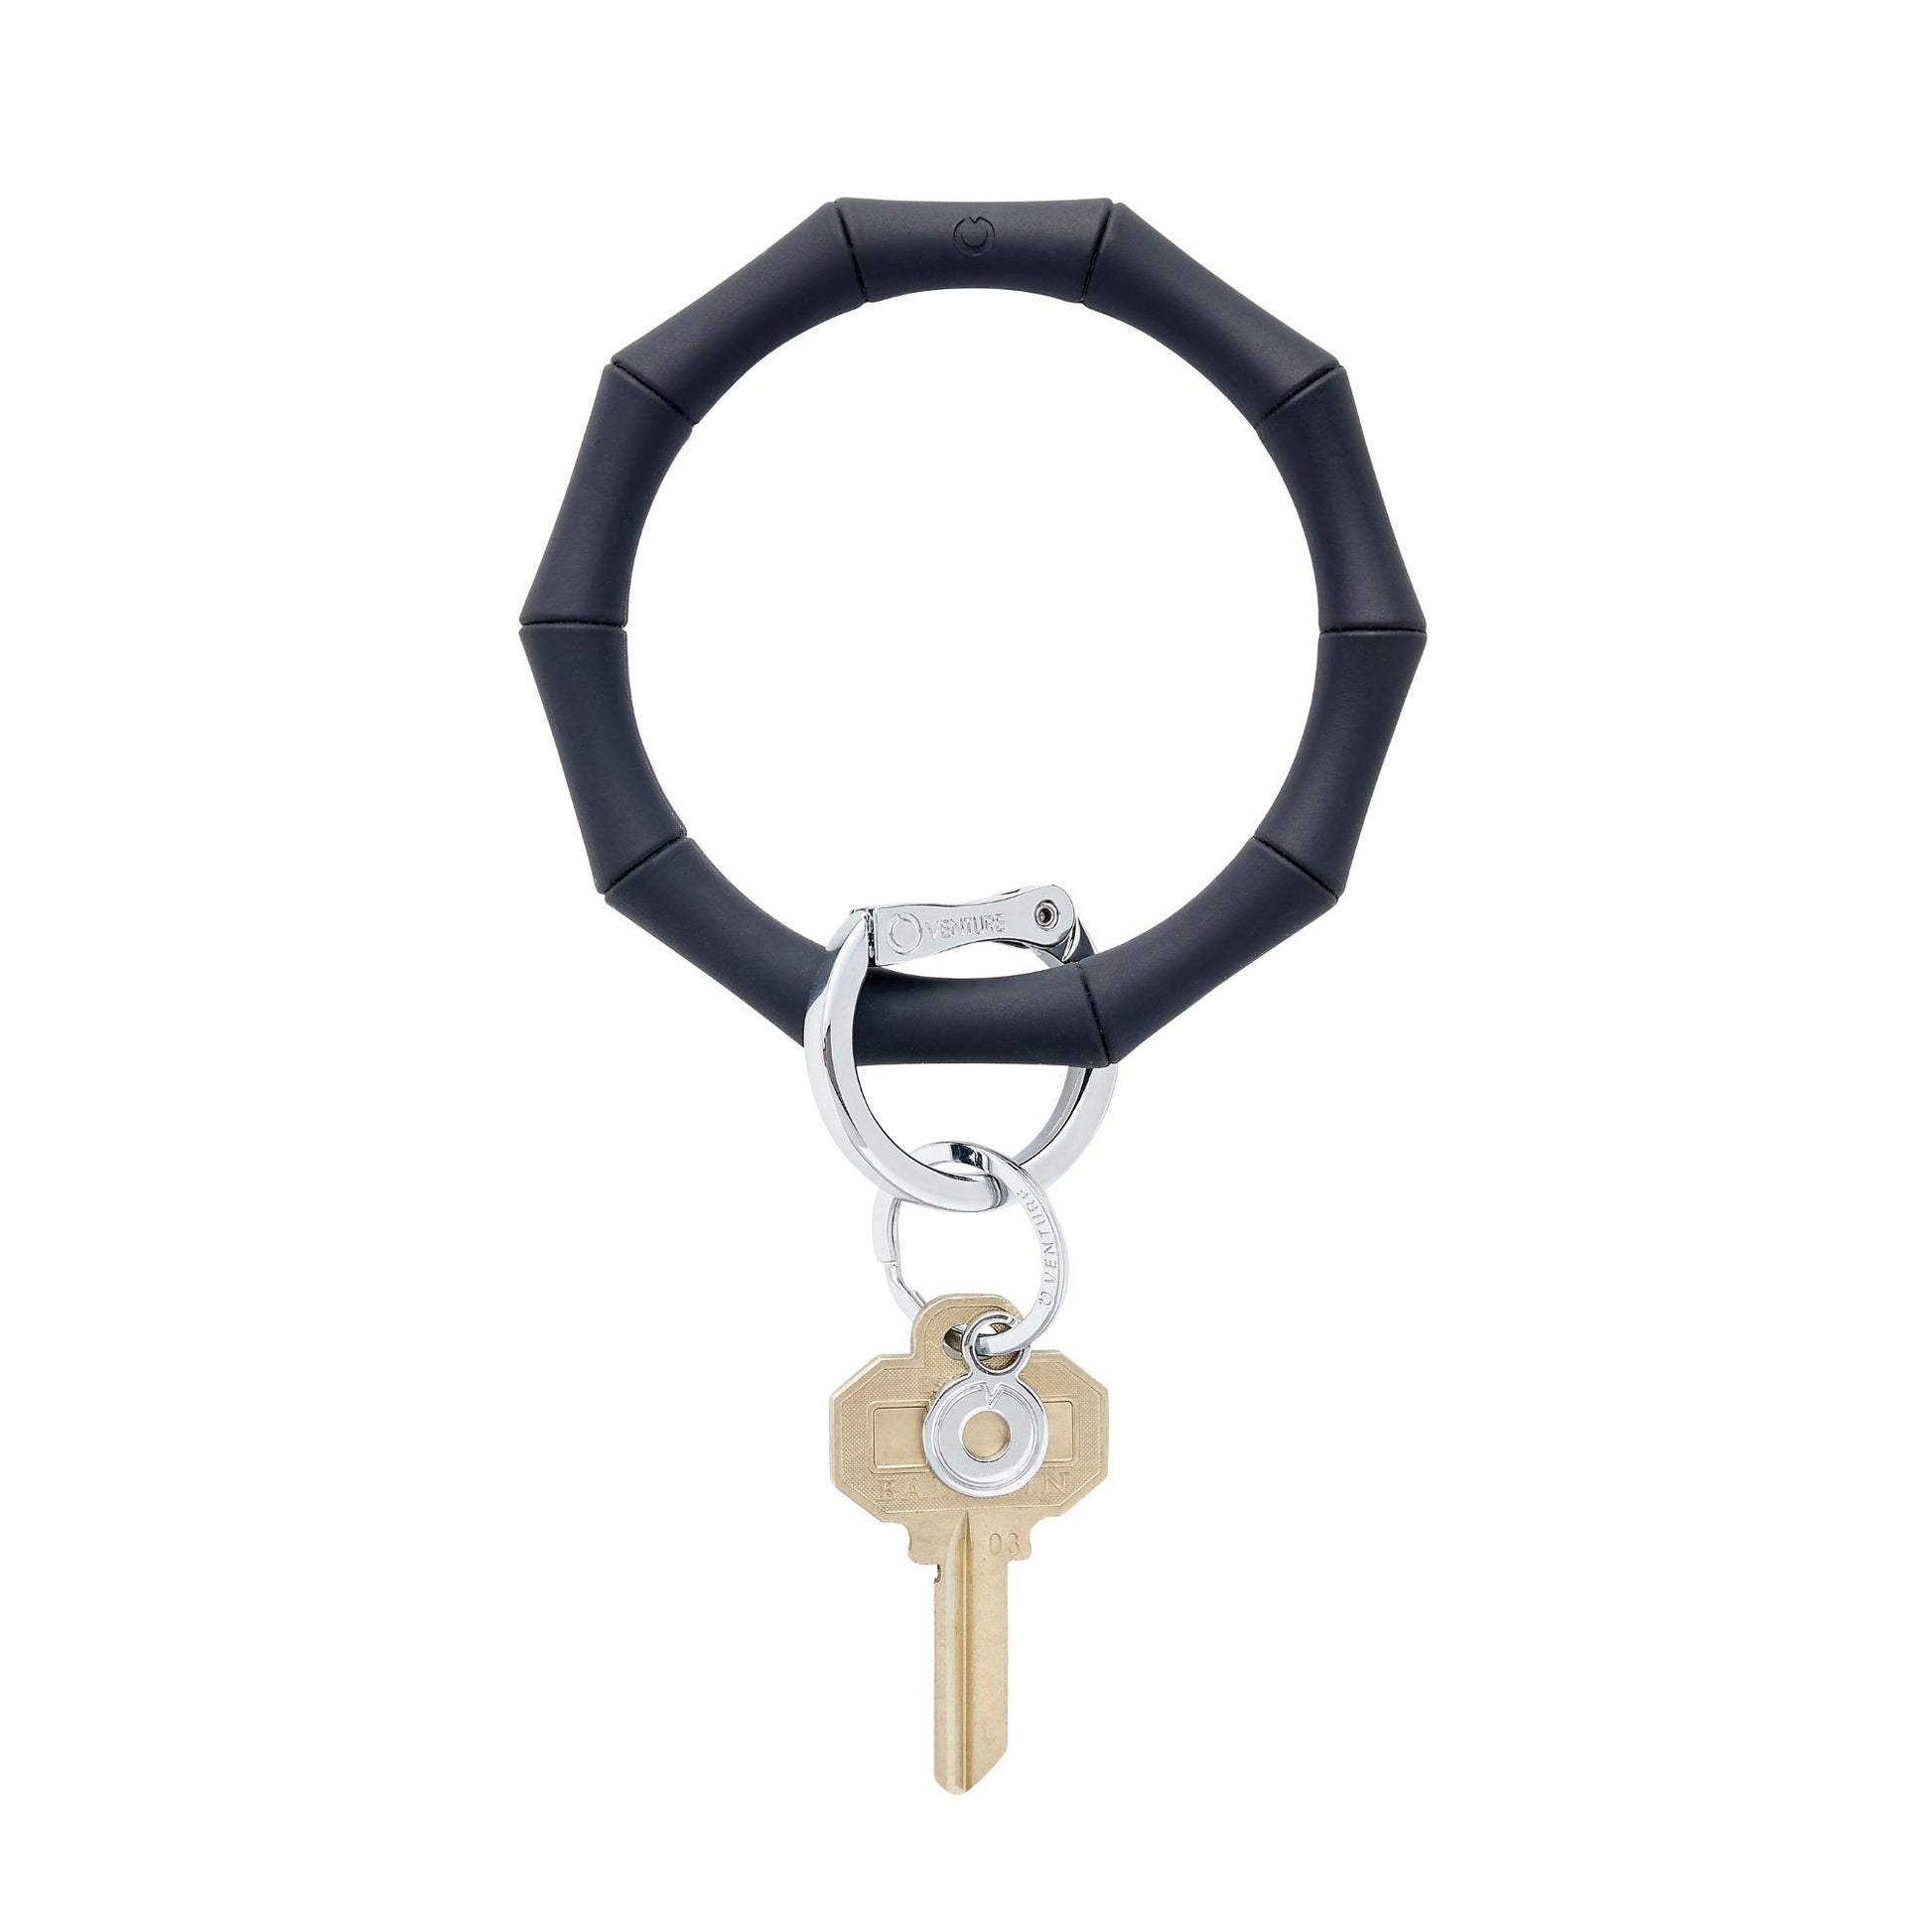 Back in Black Bamboo - Silicone Big O Key Ring - Oventure